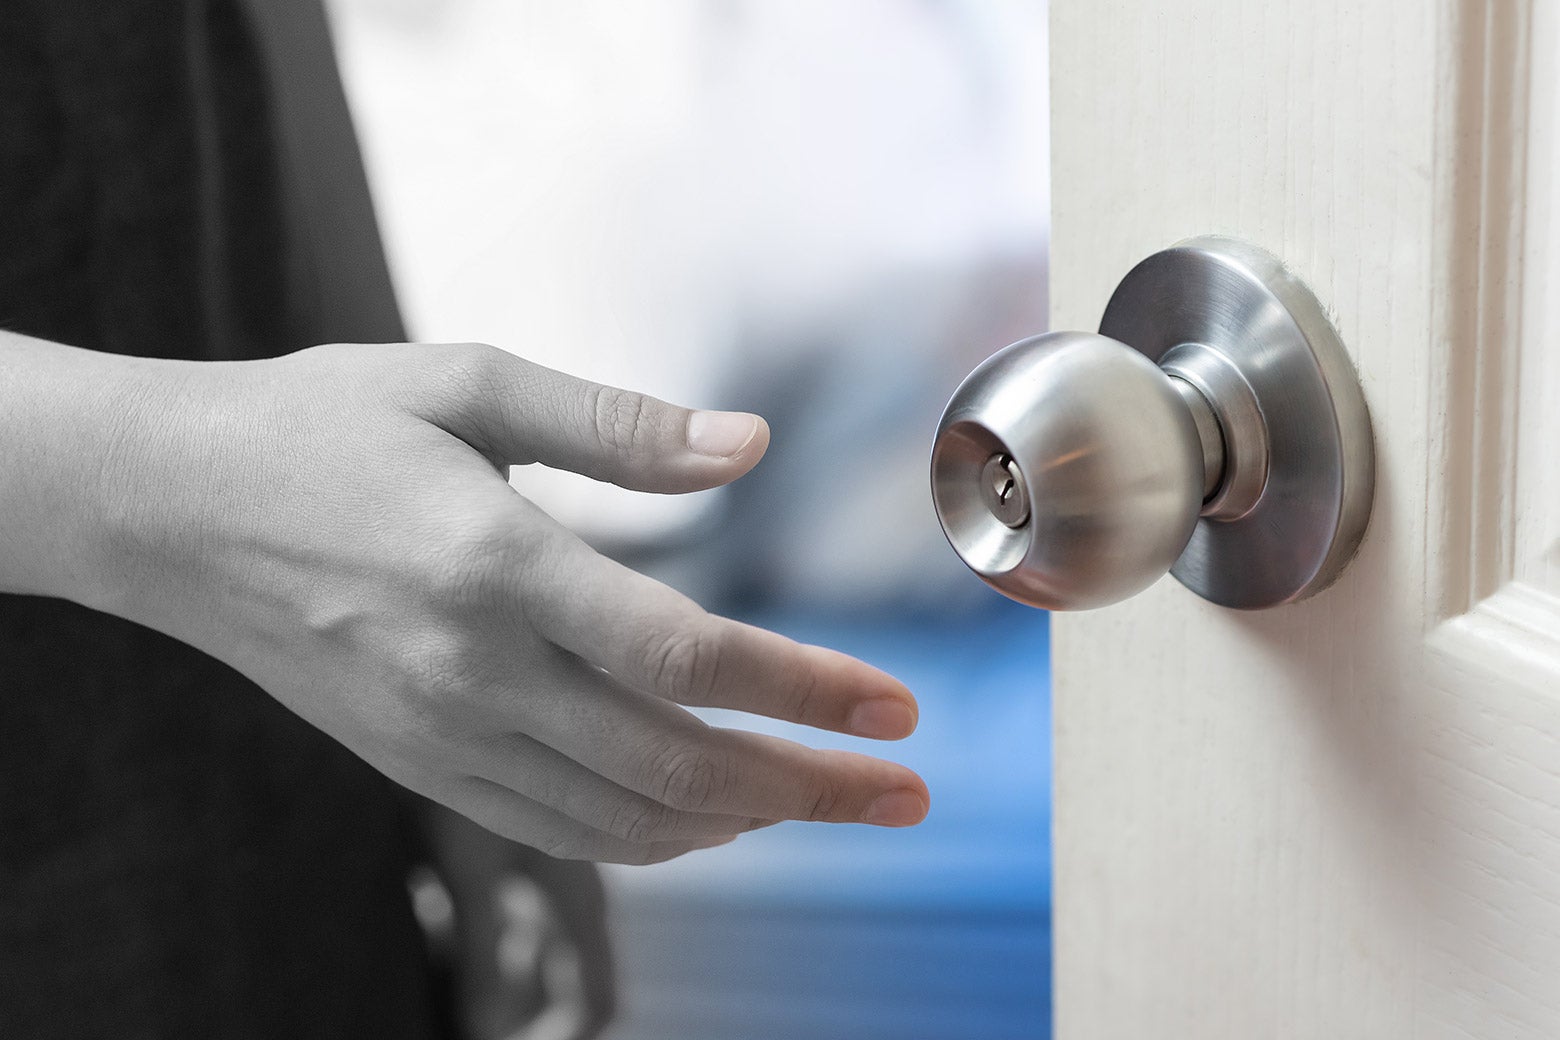 A hand reaching for a doorknob, with half of the image in black and white